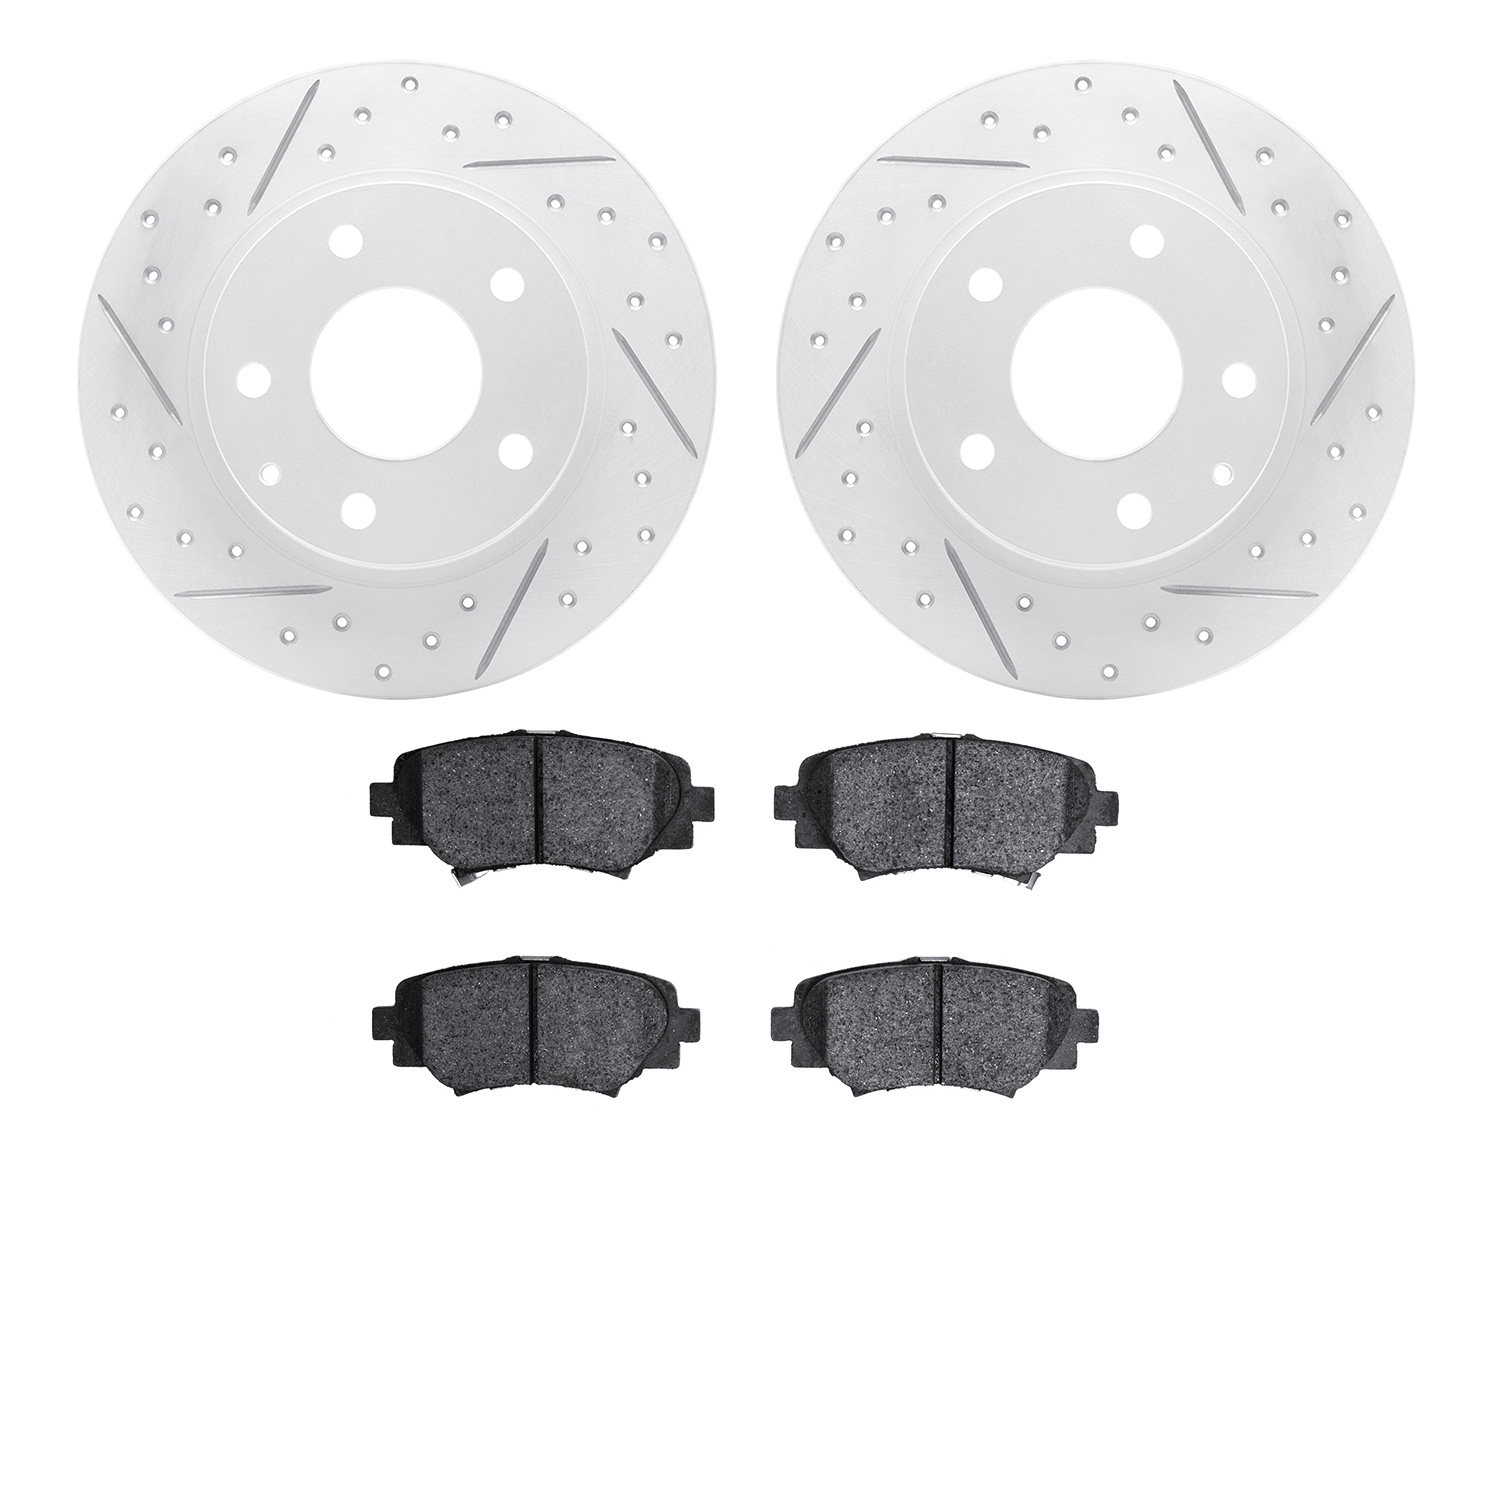 2502-80027 Geoperformance Drilled/Slotted Rotors w/5000 Advanced Brake Pads Kit, 2014-2016 Ford/Lincoln/Mercury/Mazda, Position: